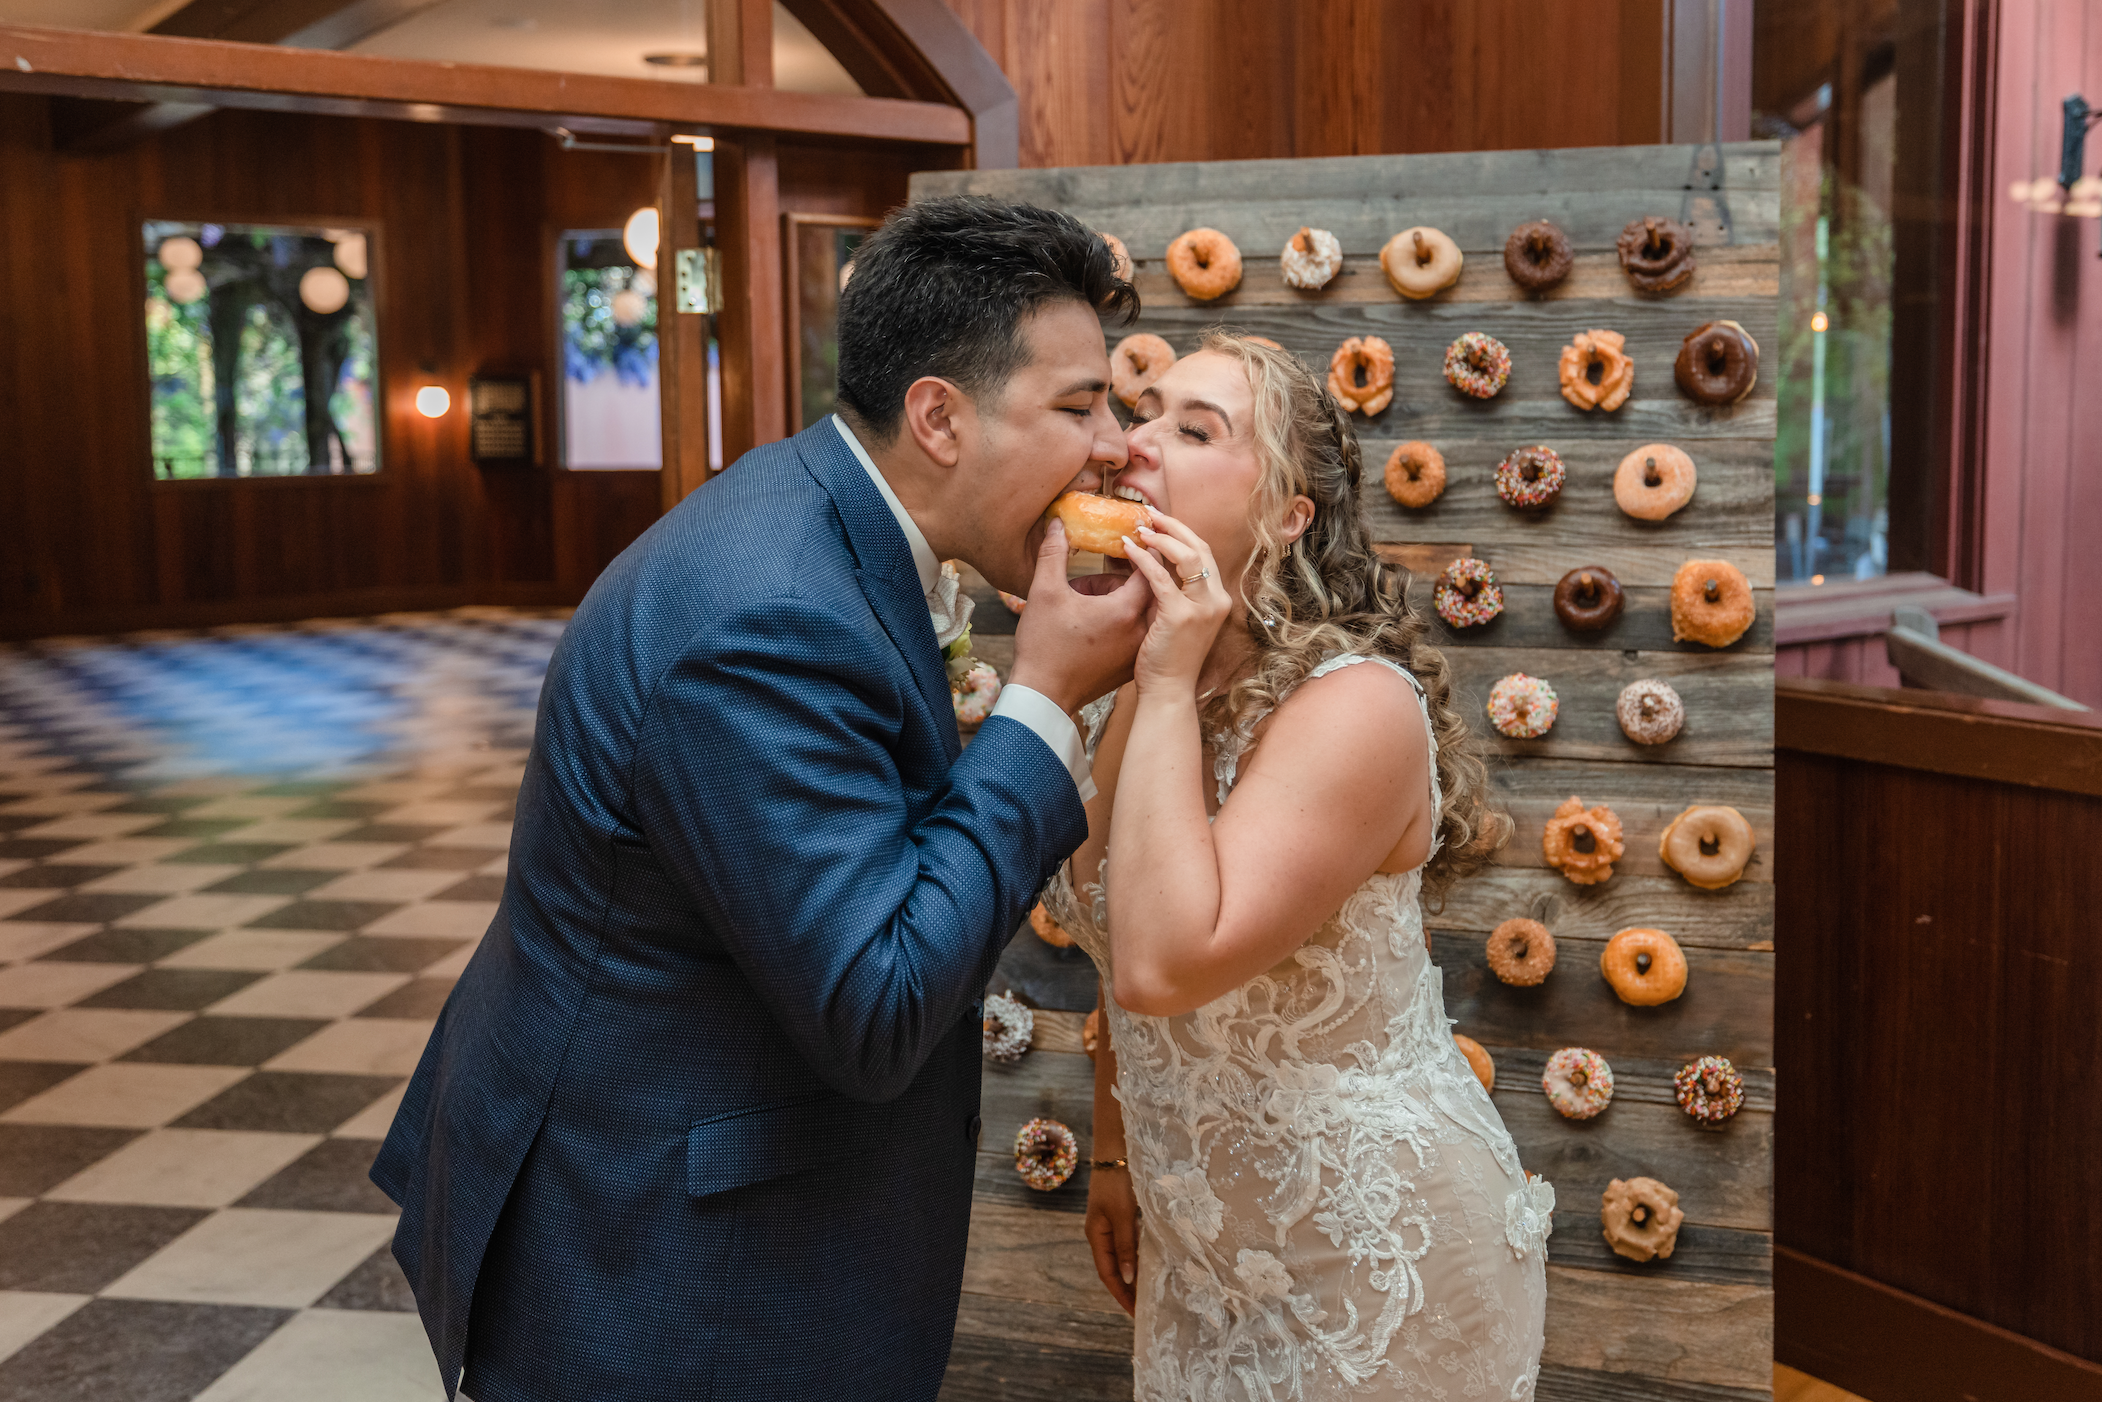 Couple eating a donut instead of the traditional cake cutting moment